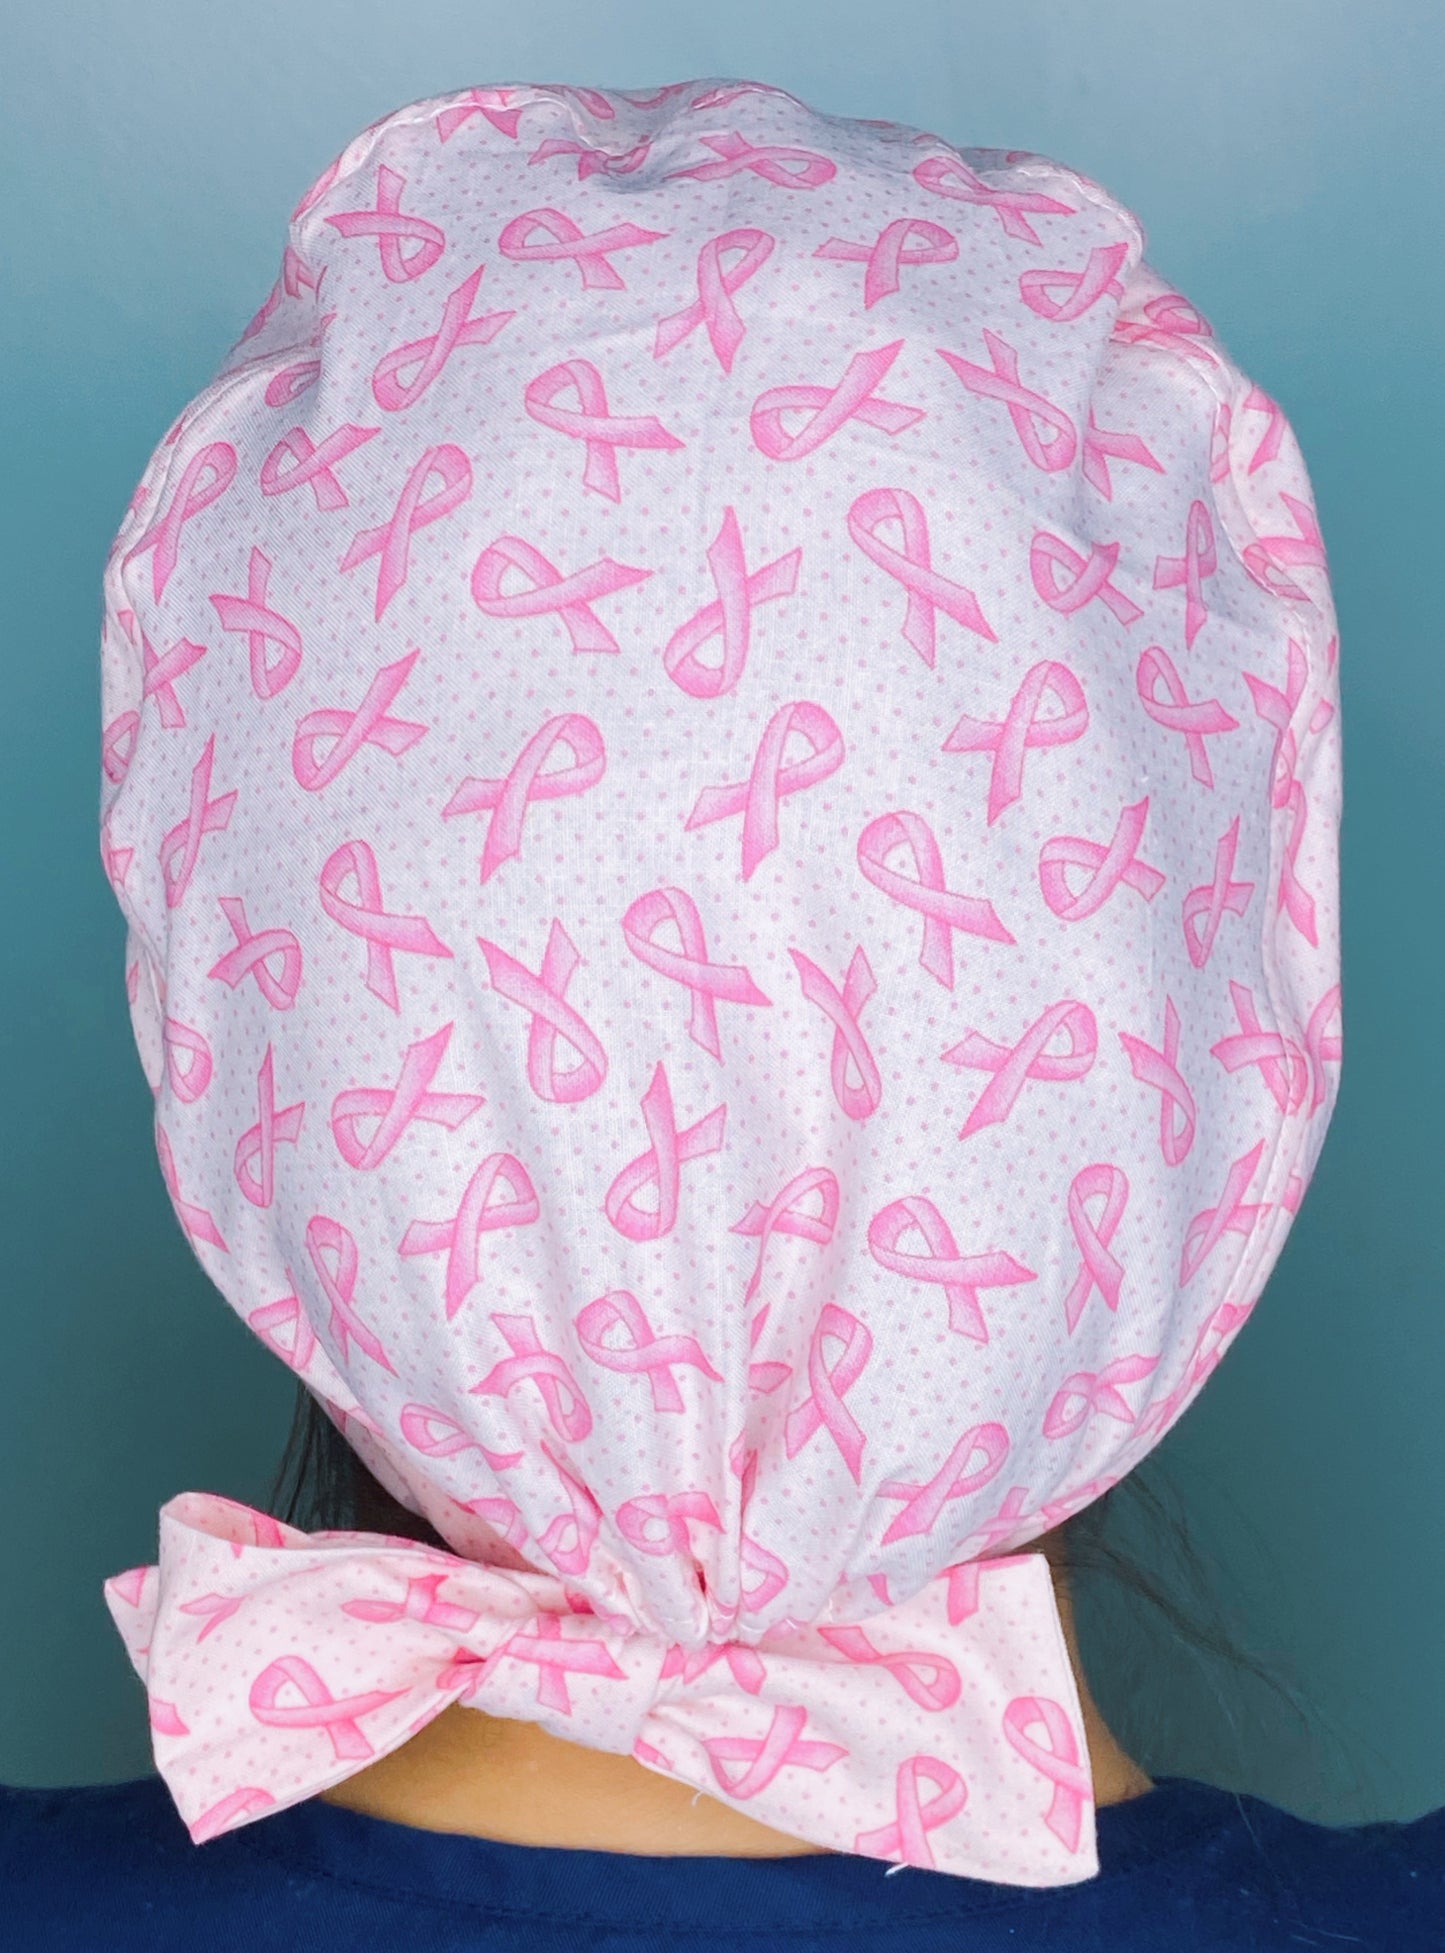 Breast Cancer Awareness Ribbons On Pink Awareness Themed Pixie